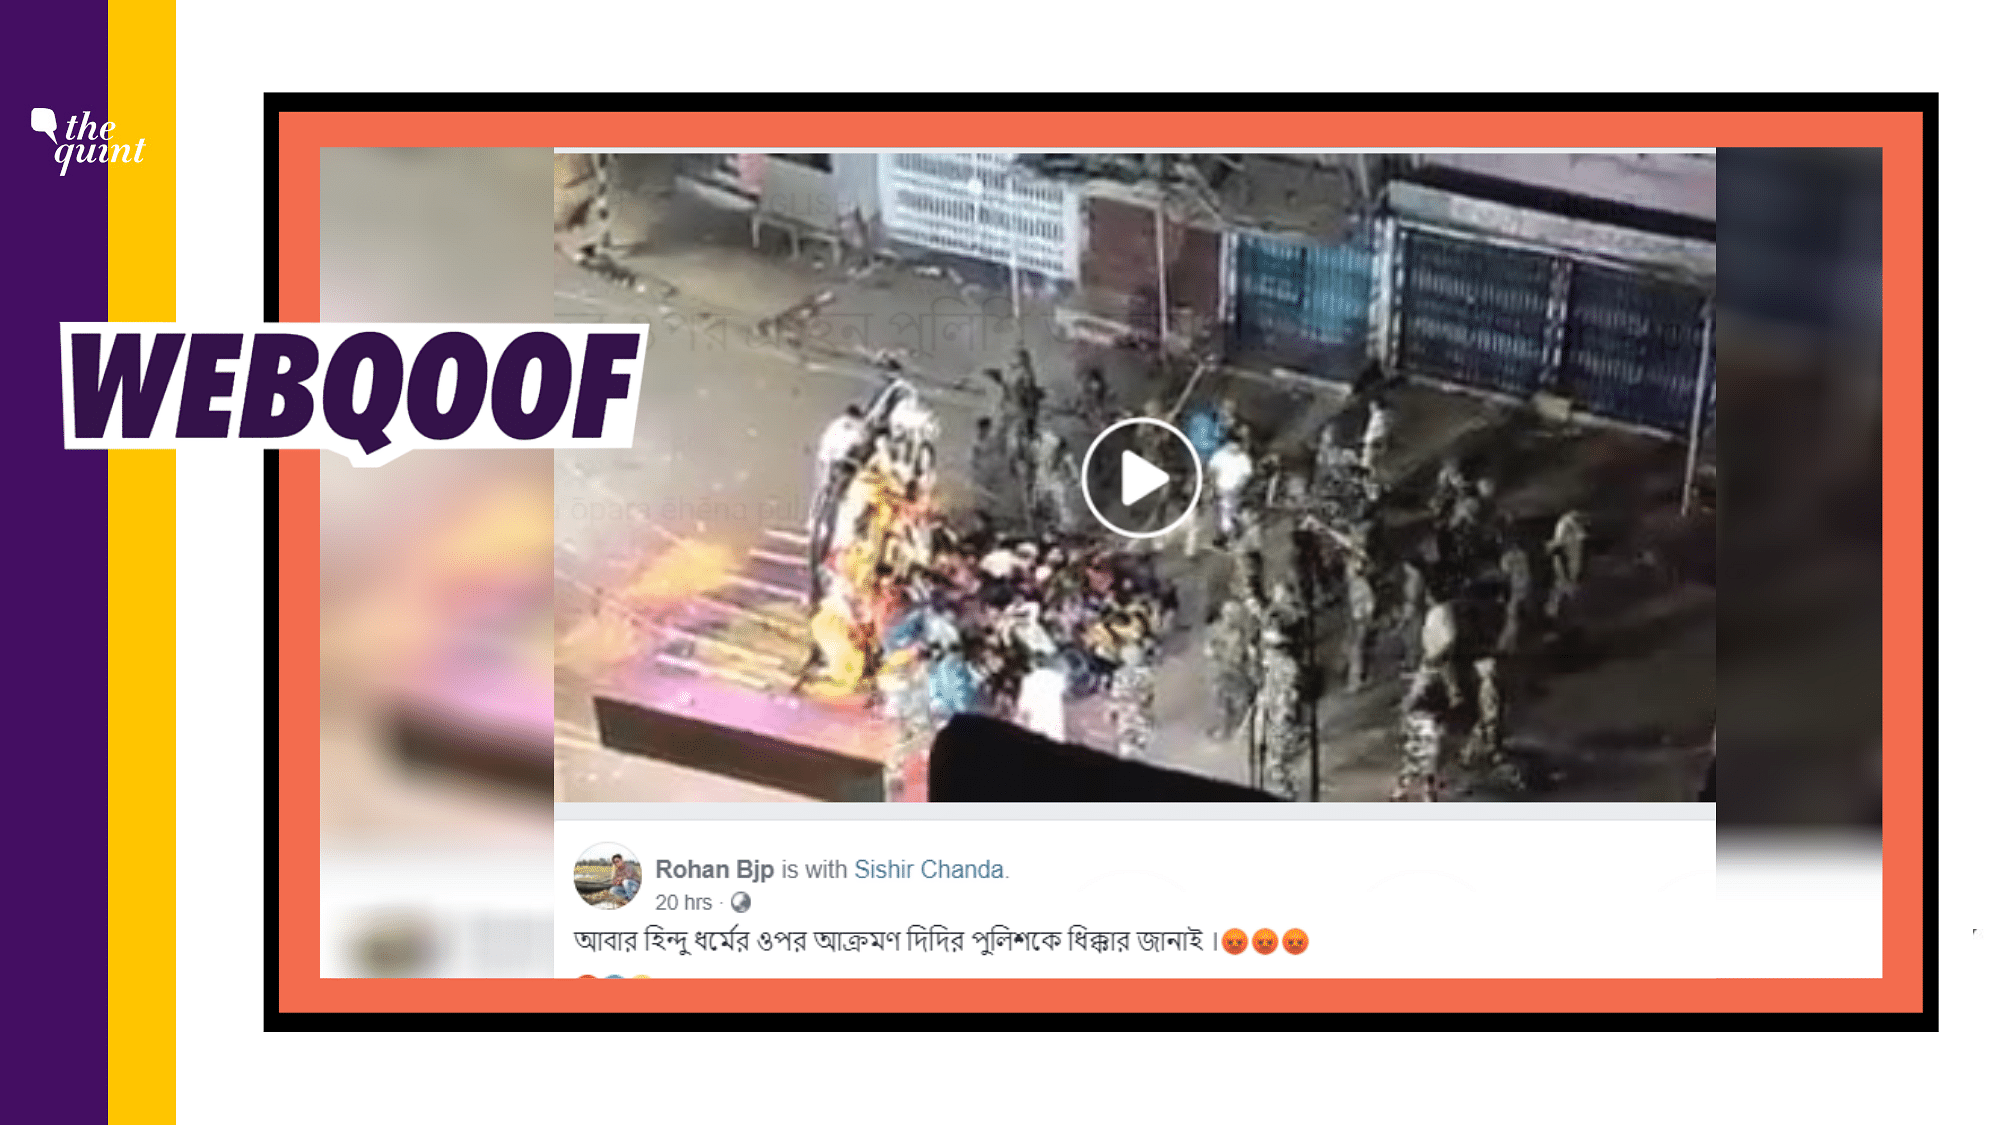 Visuals from Bihar of a clash with police over Durga immersion has been falsely shared as violence in West Bengal.